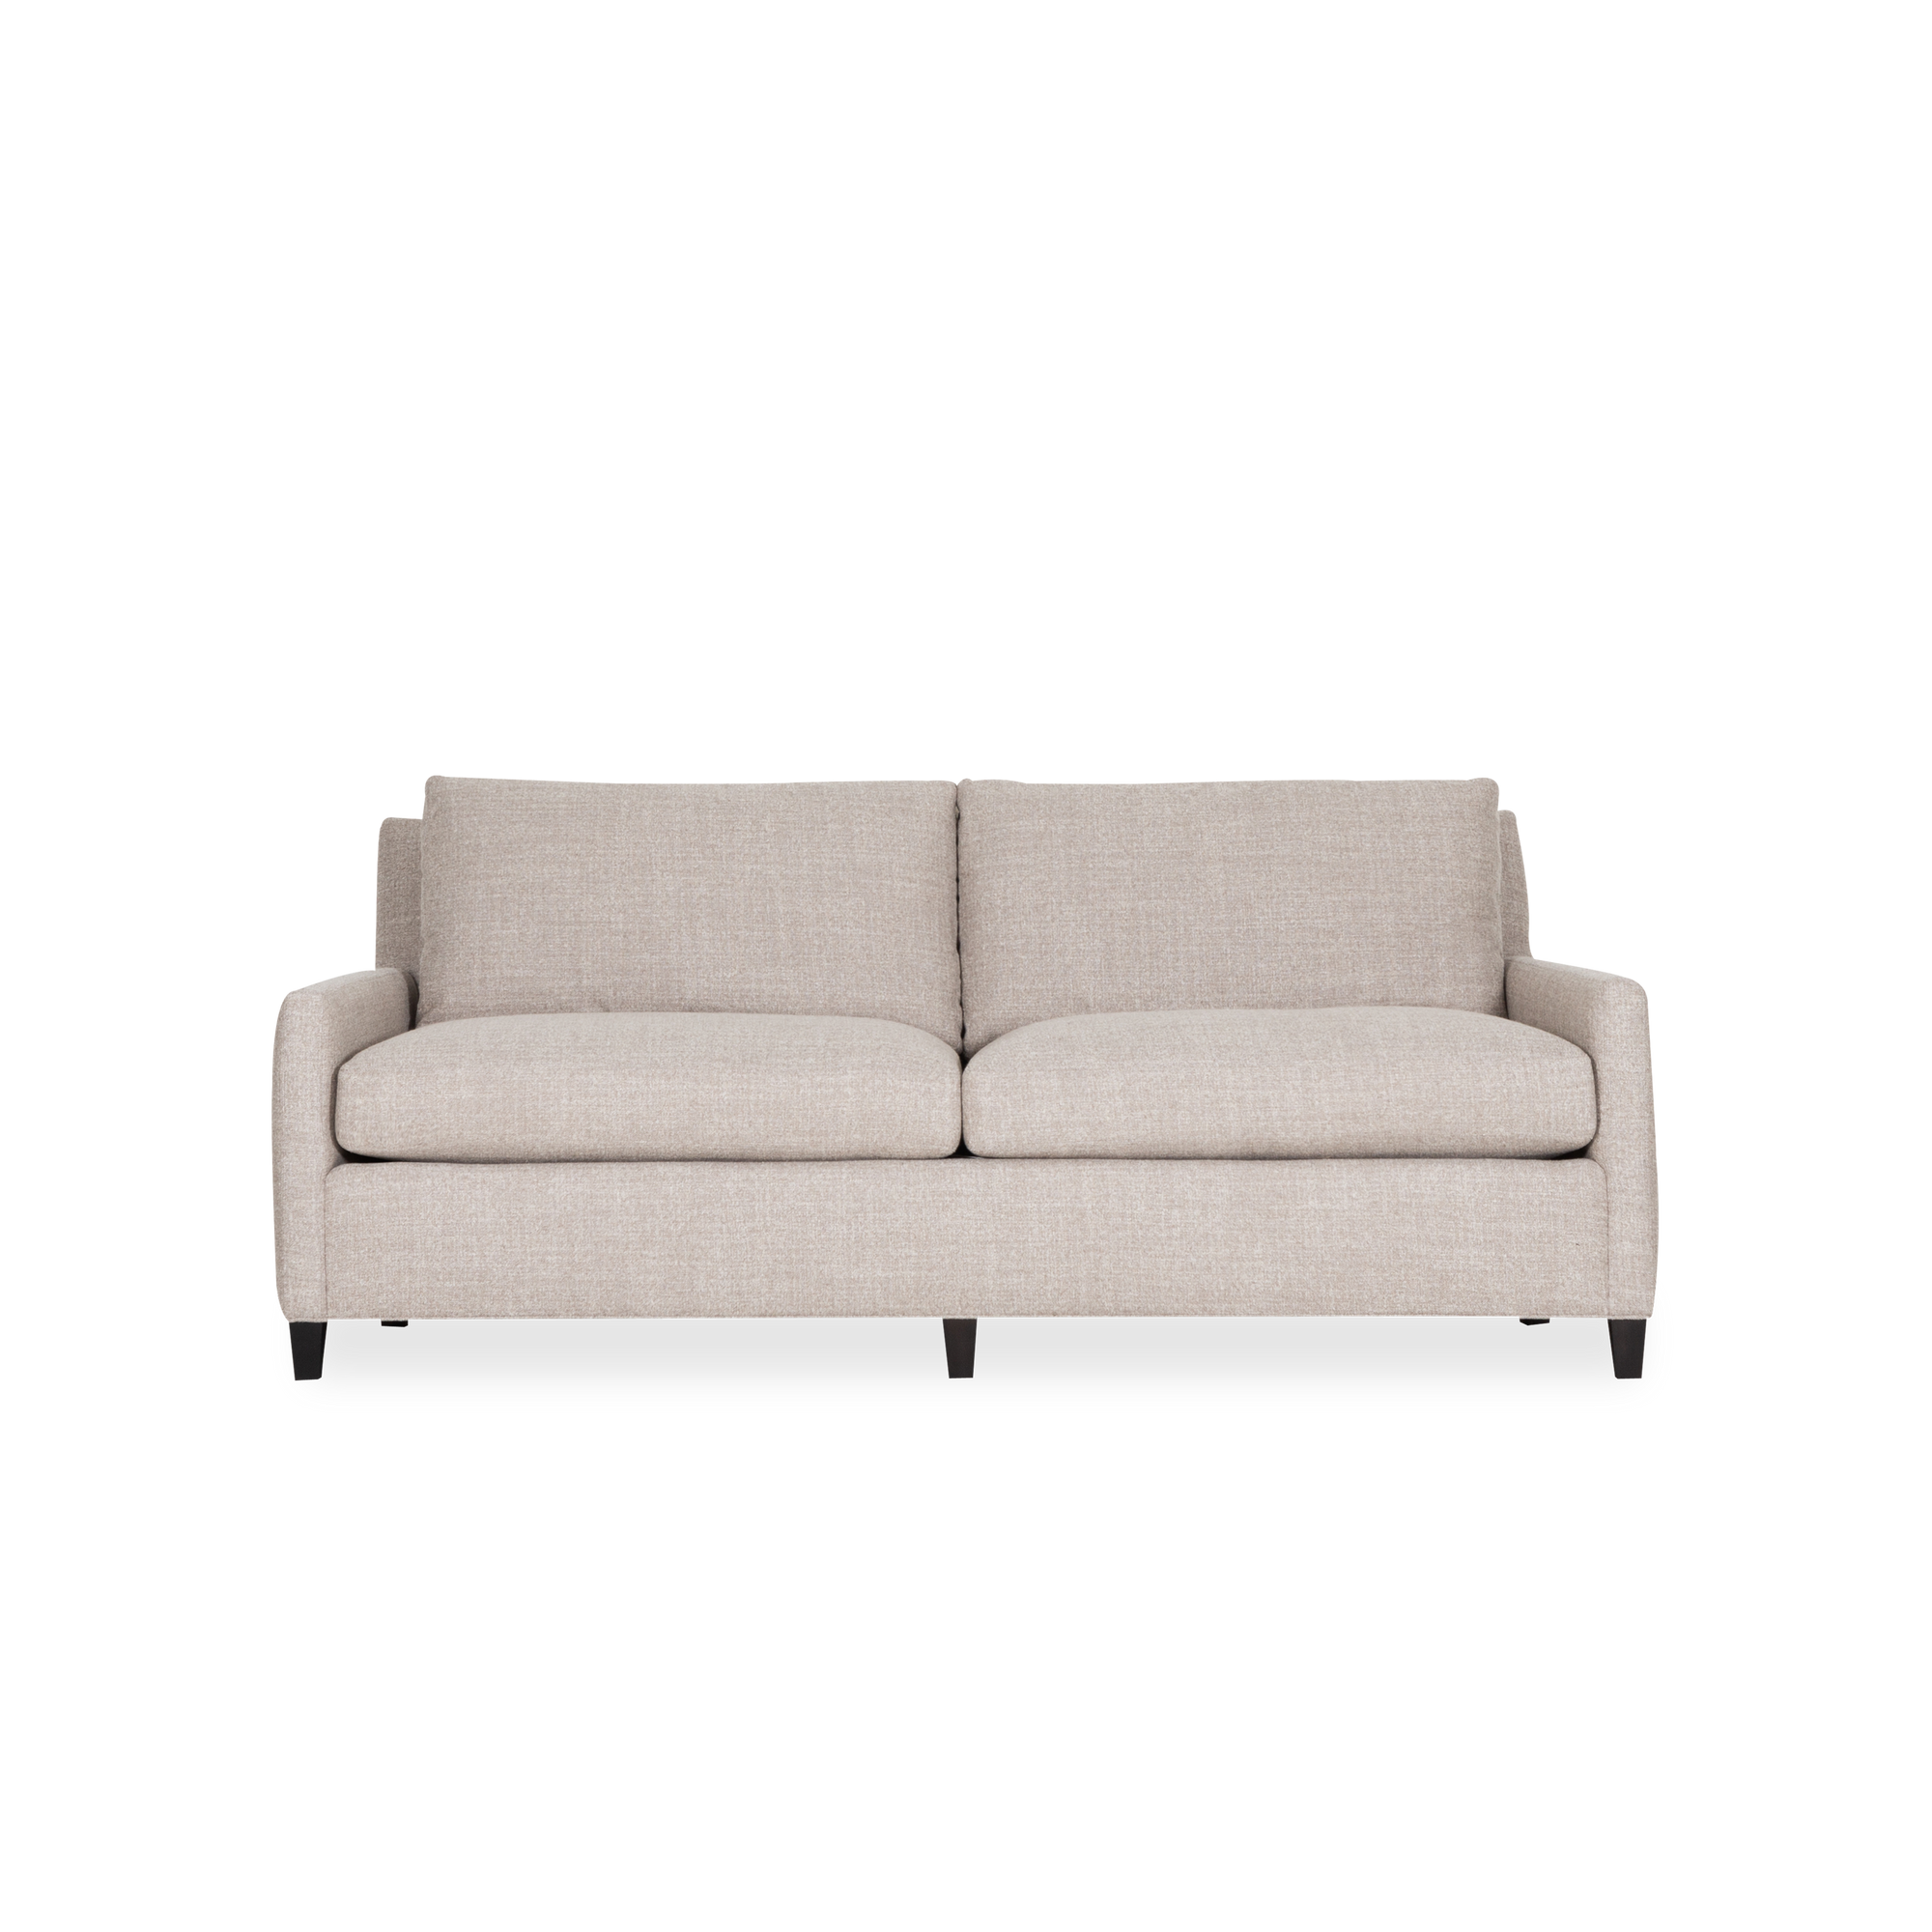 Inspired by mid-century modern design, the Weston Sofa is a classic piece to add to your space.